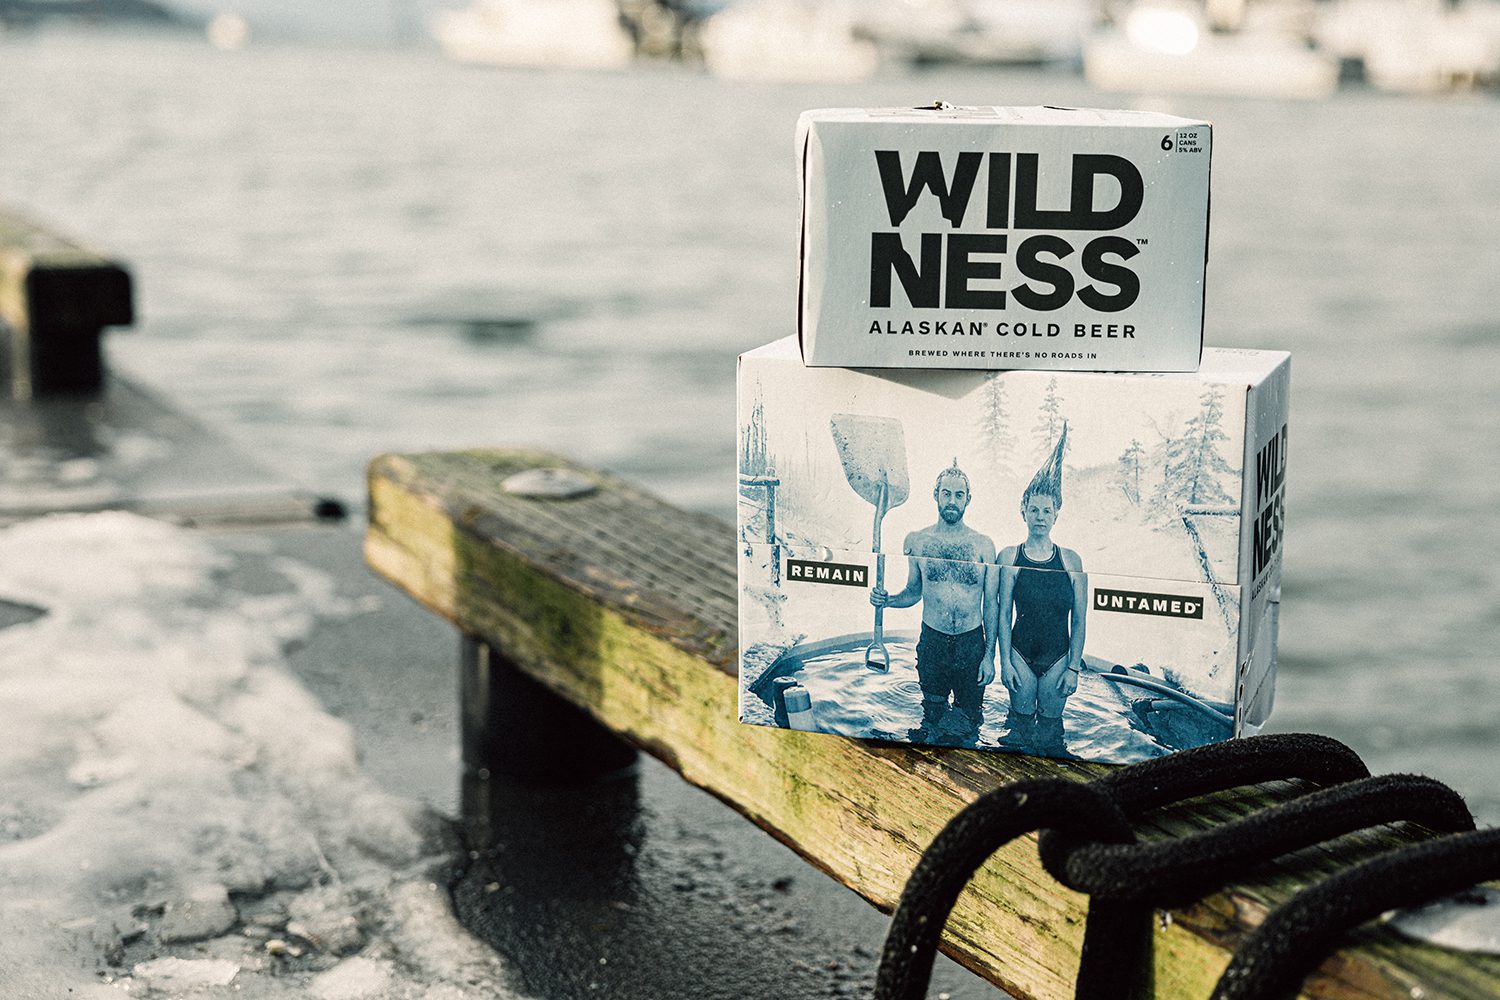 Packages of WILDNESS beer sit on an icy dock